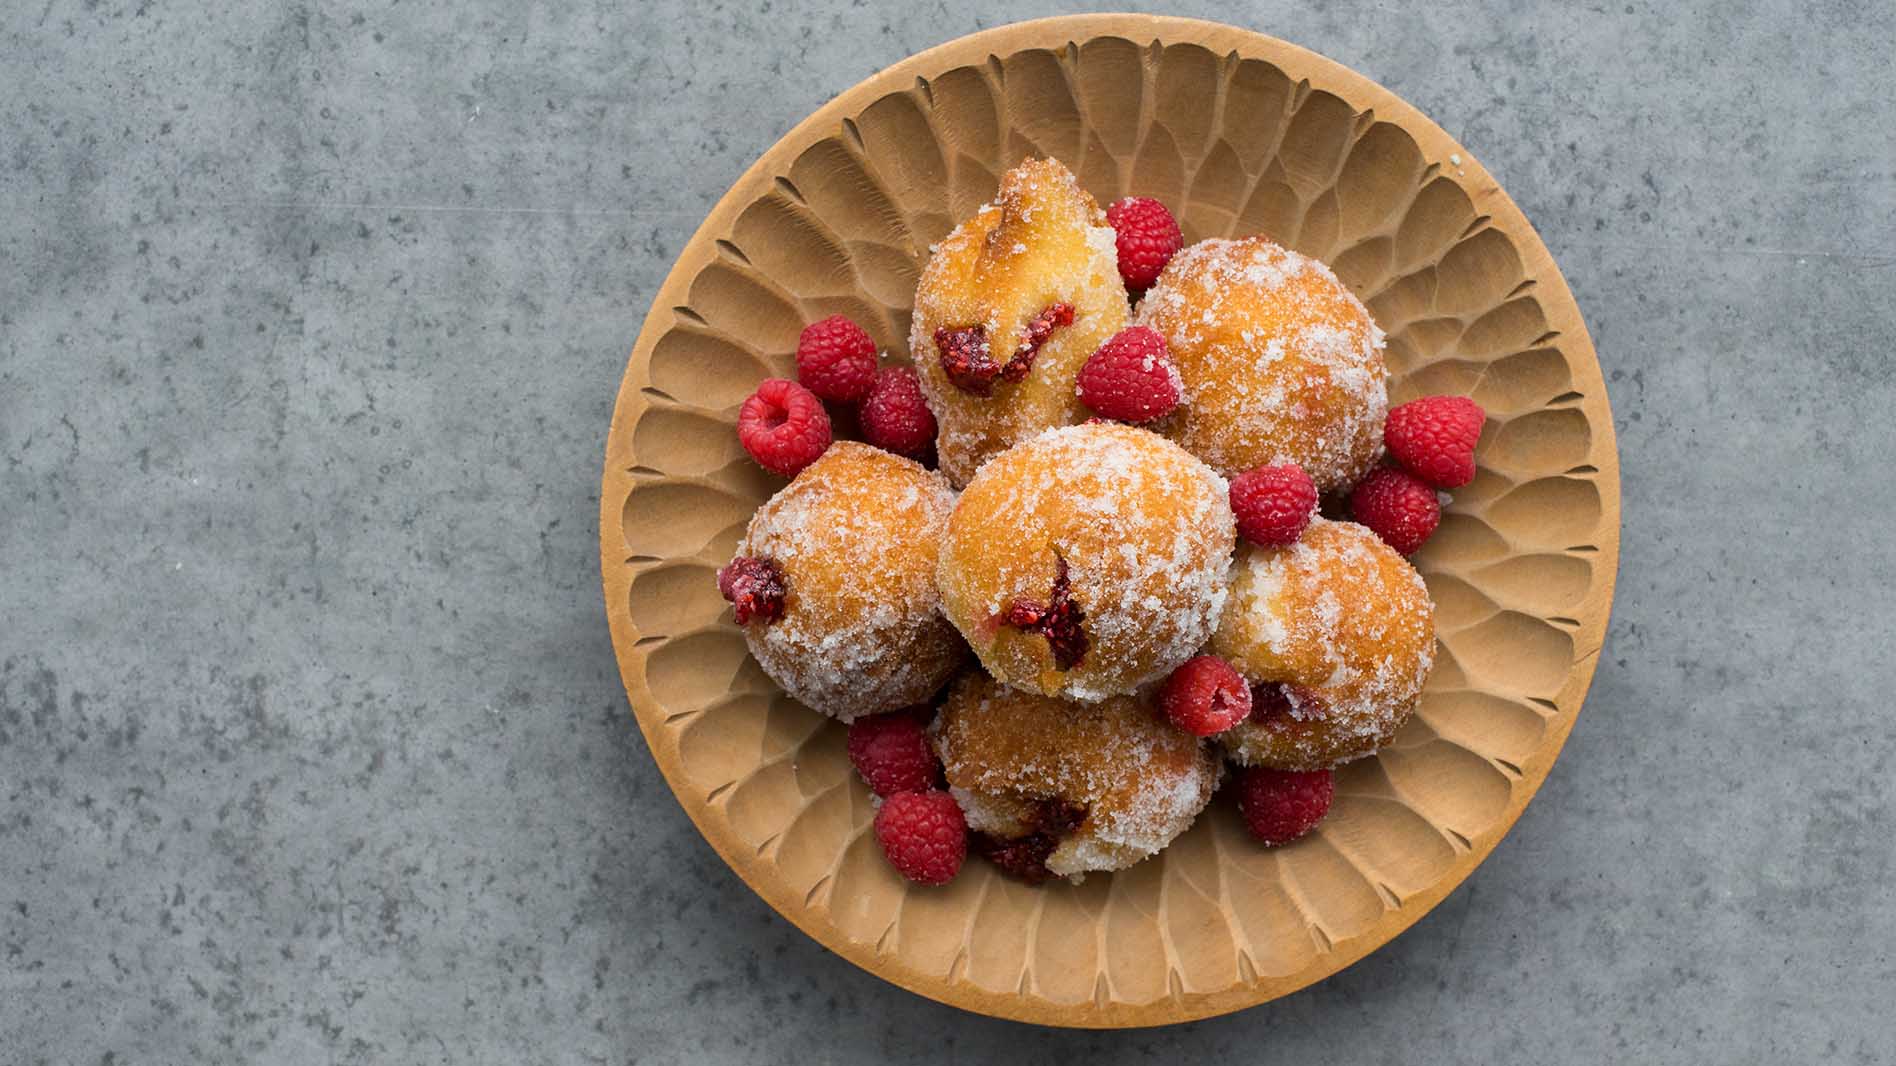 Hot raspberry jam filled donuts